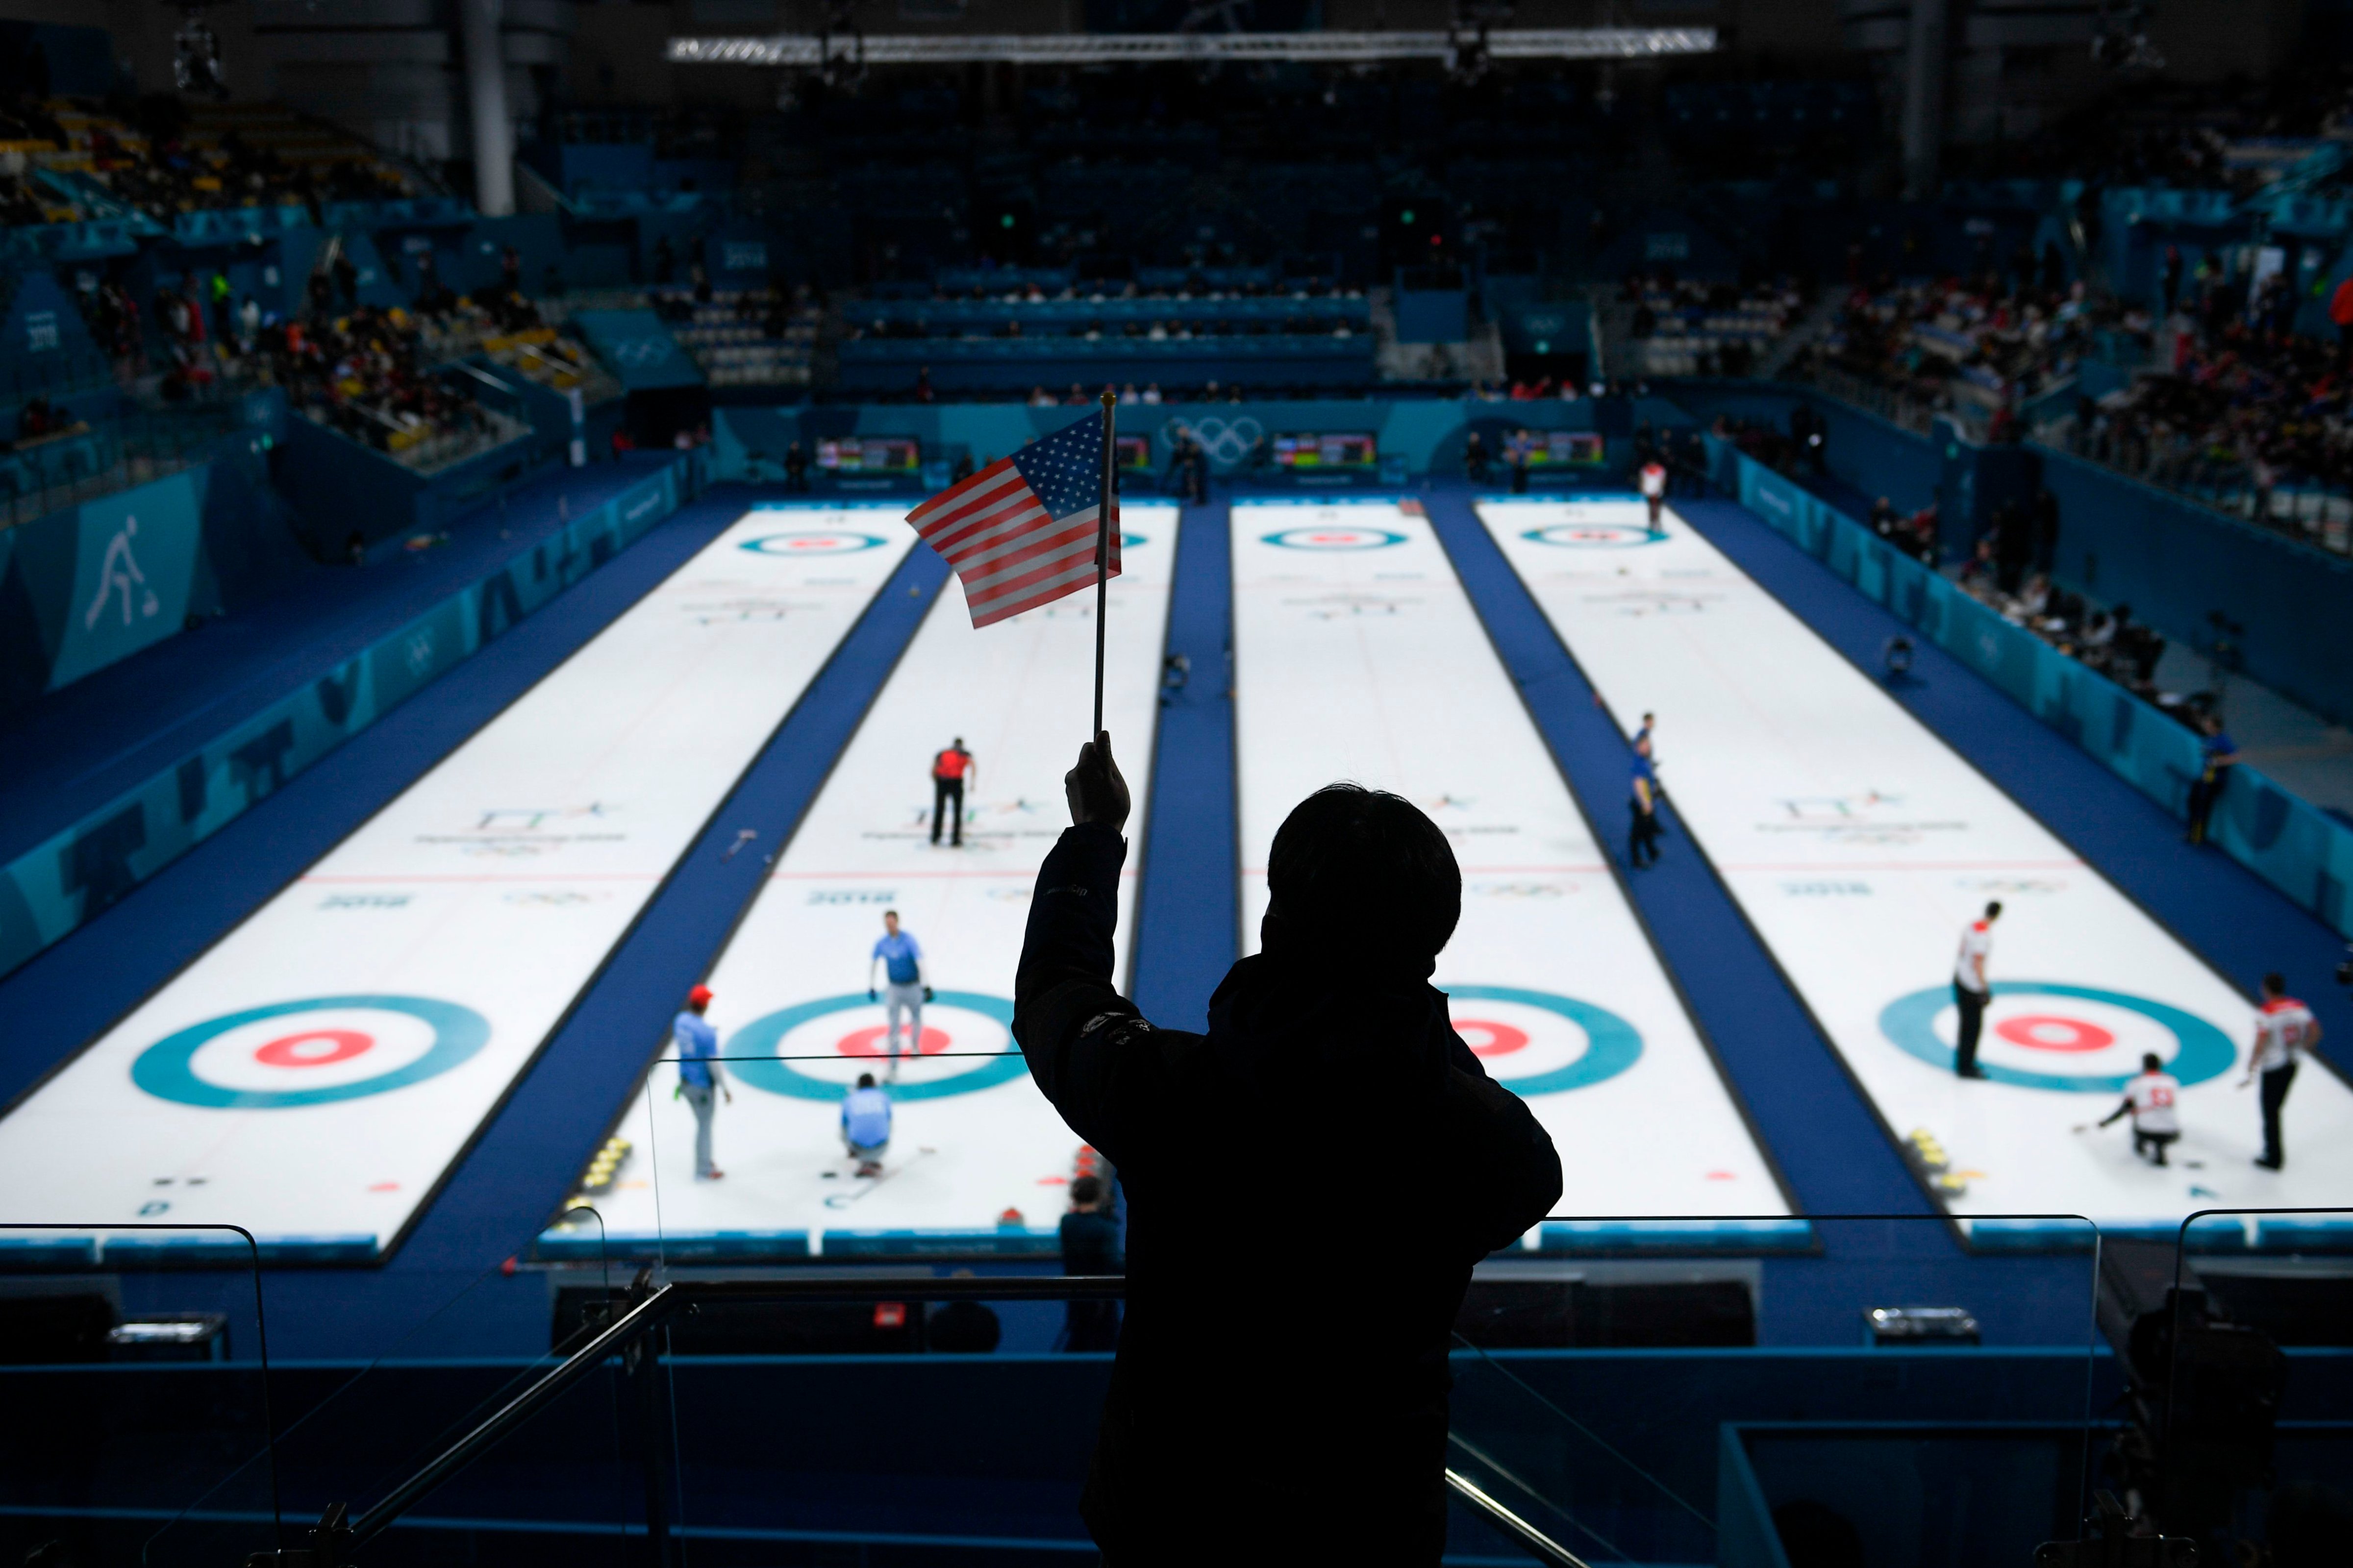 A man waves an American flag during the curling men's semi-final game between Canada and USA during the Pyeongchang 2018 Winter Olympic Games at the Gangneung Curling Centre in Gangneung on February 22, 2018. (WANG ZHAO—AFP/Getty Images)